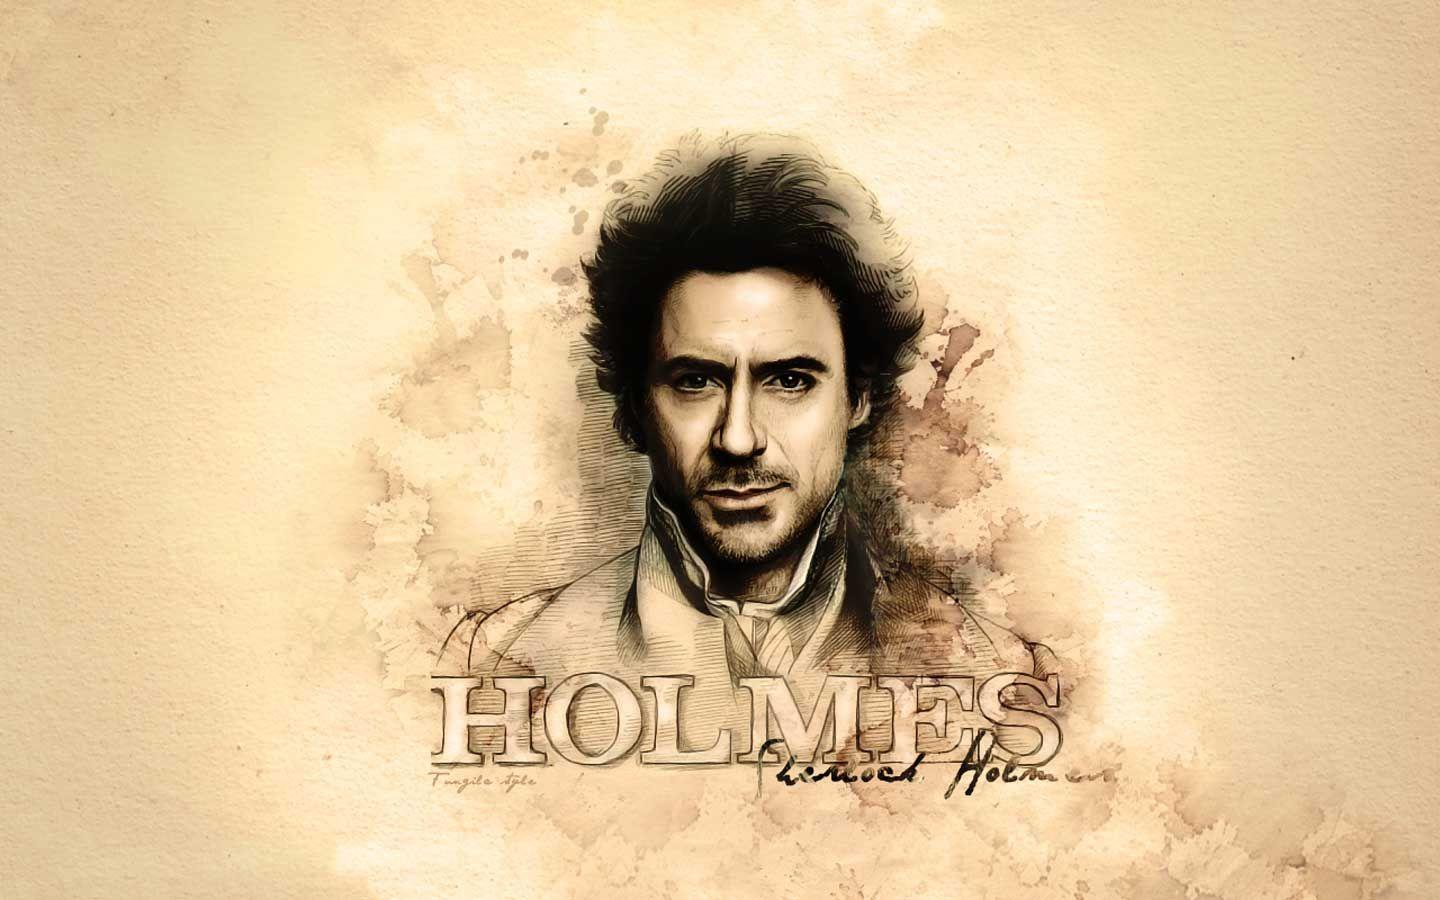 Sherlock Holmes Movie Wallpaper you can see very interesting